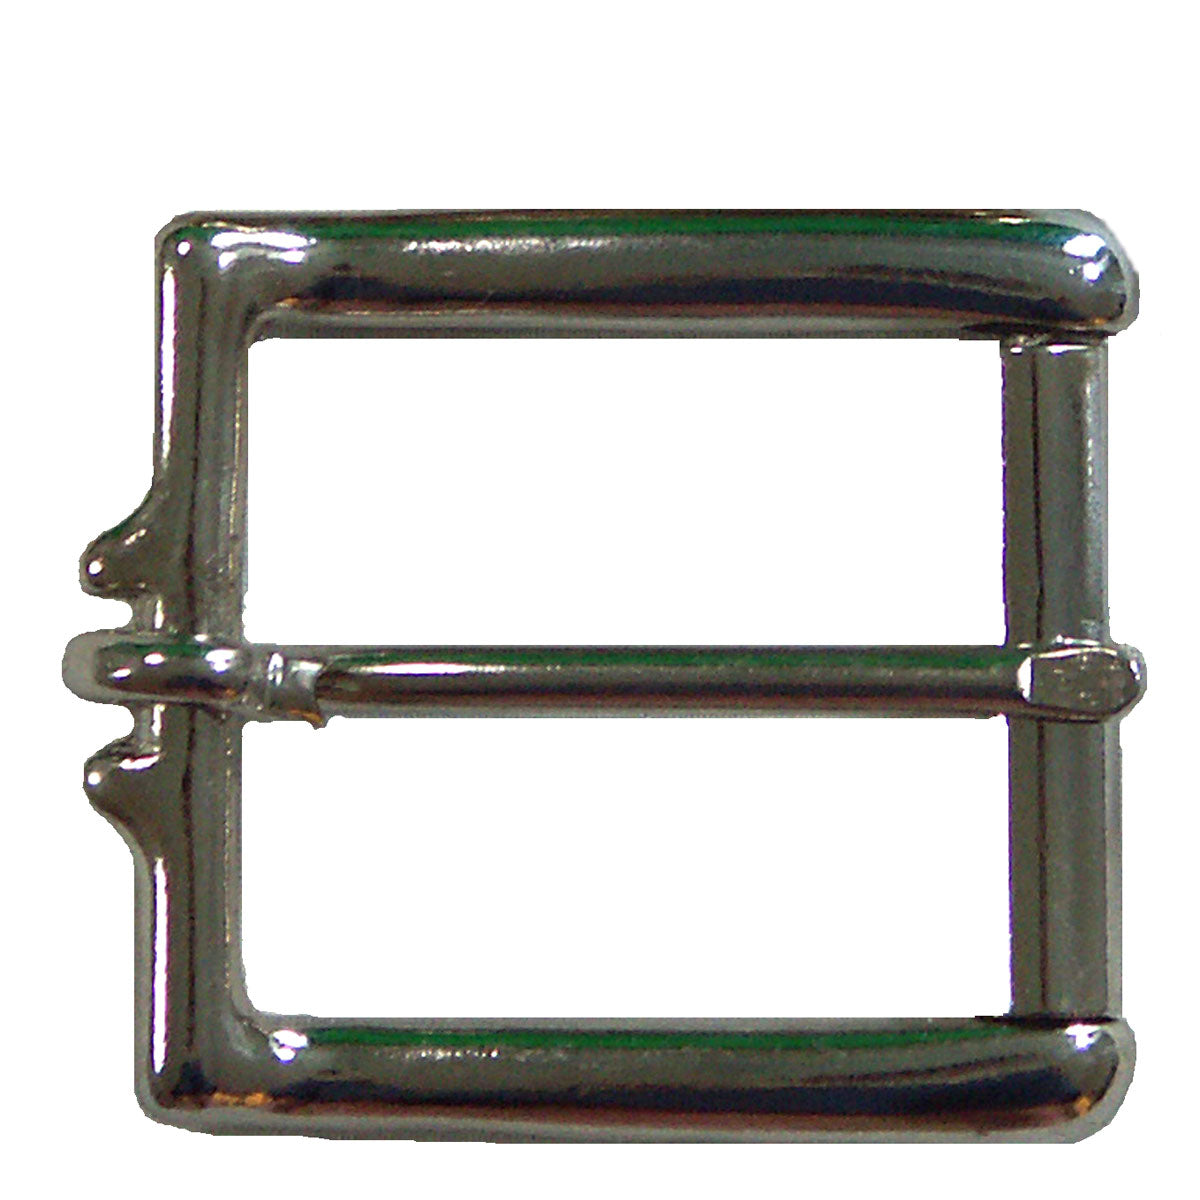 #49 Stainless Steel Buckle 5/8"